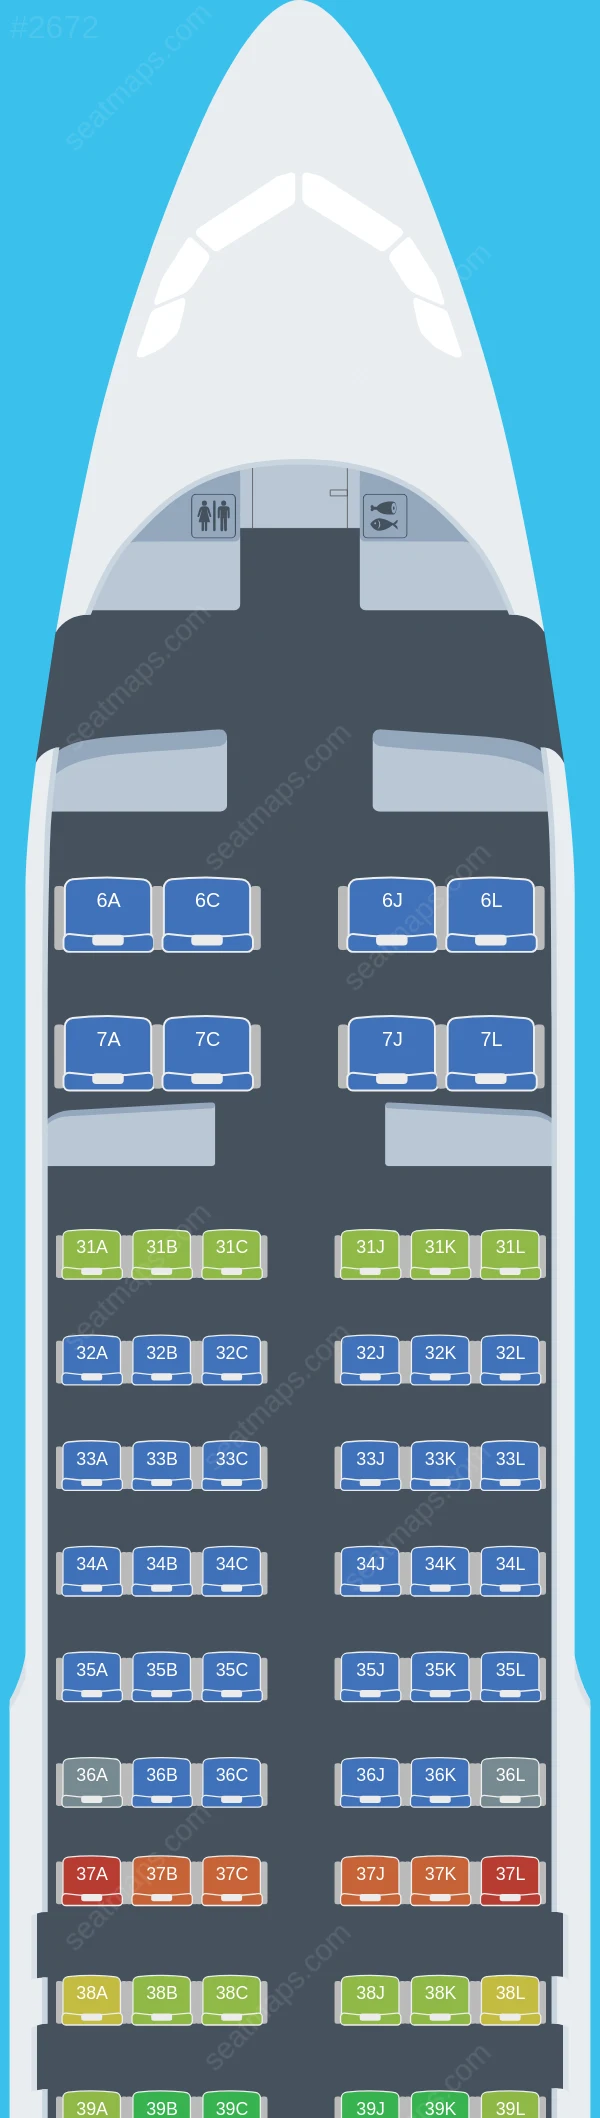 China Eastern Airbus A320-200 seatmap preview